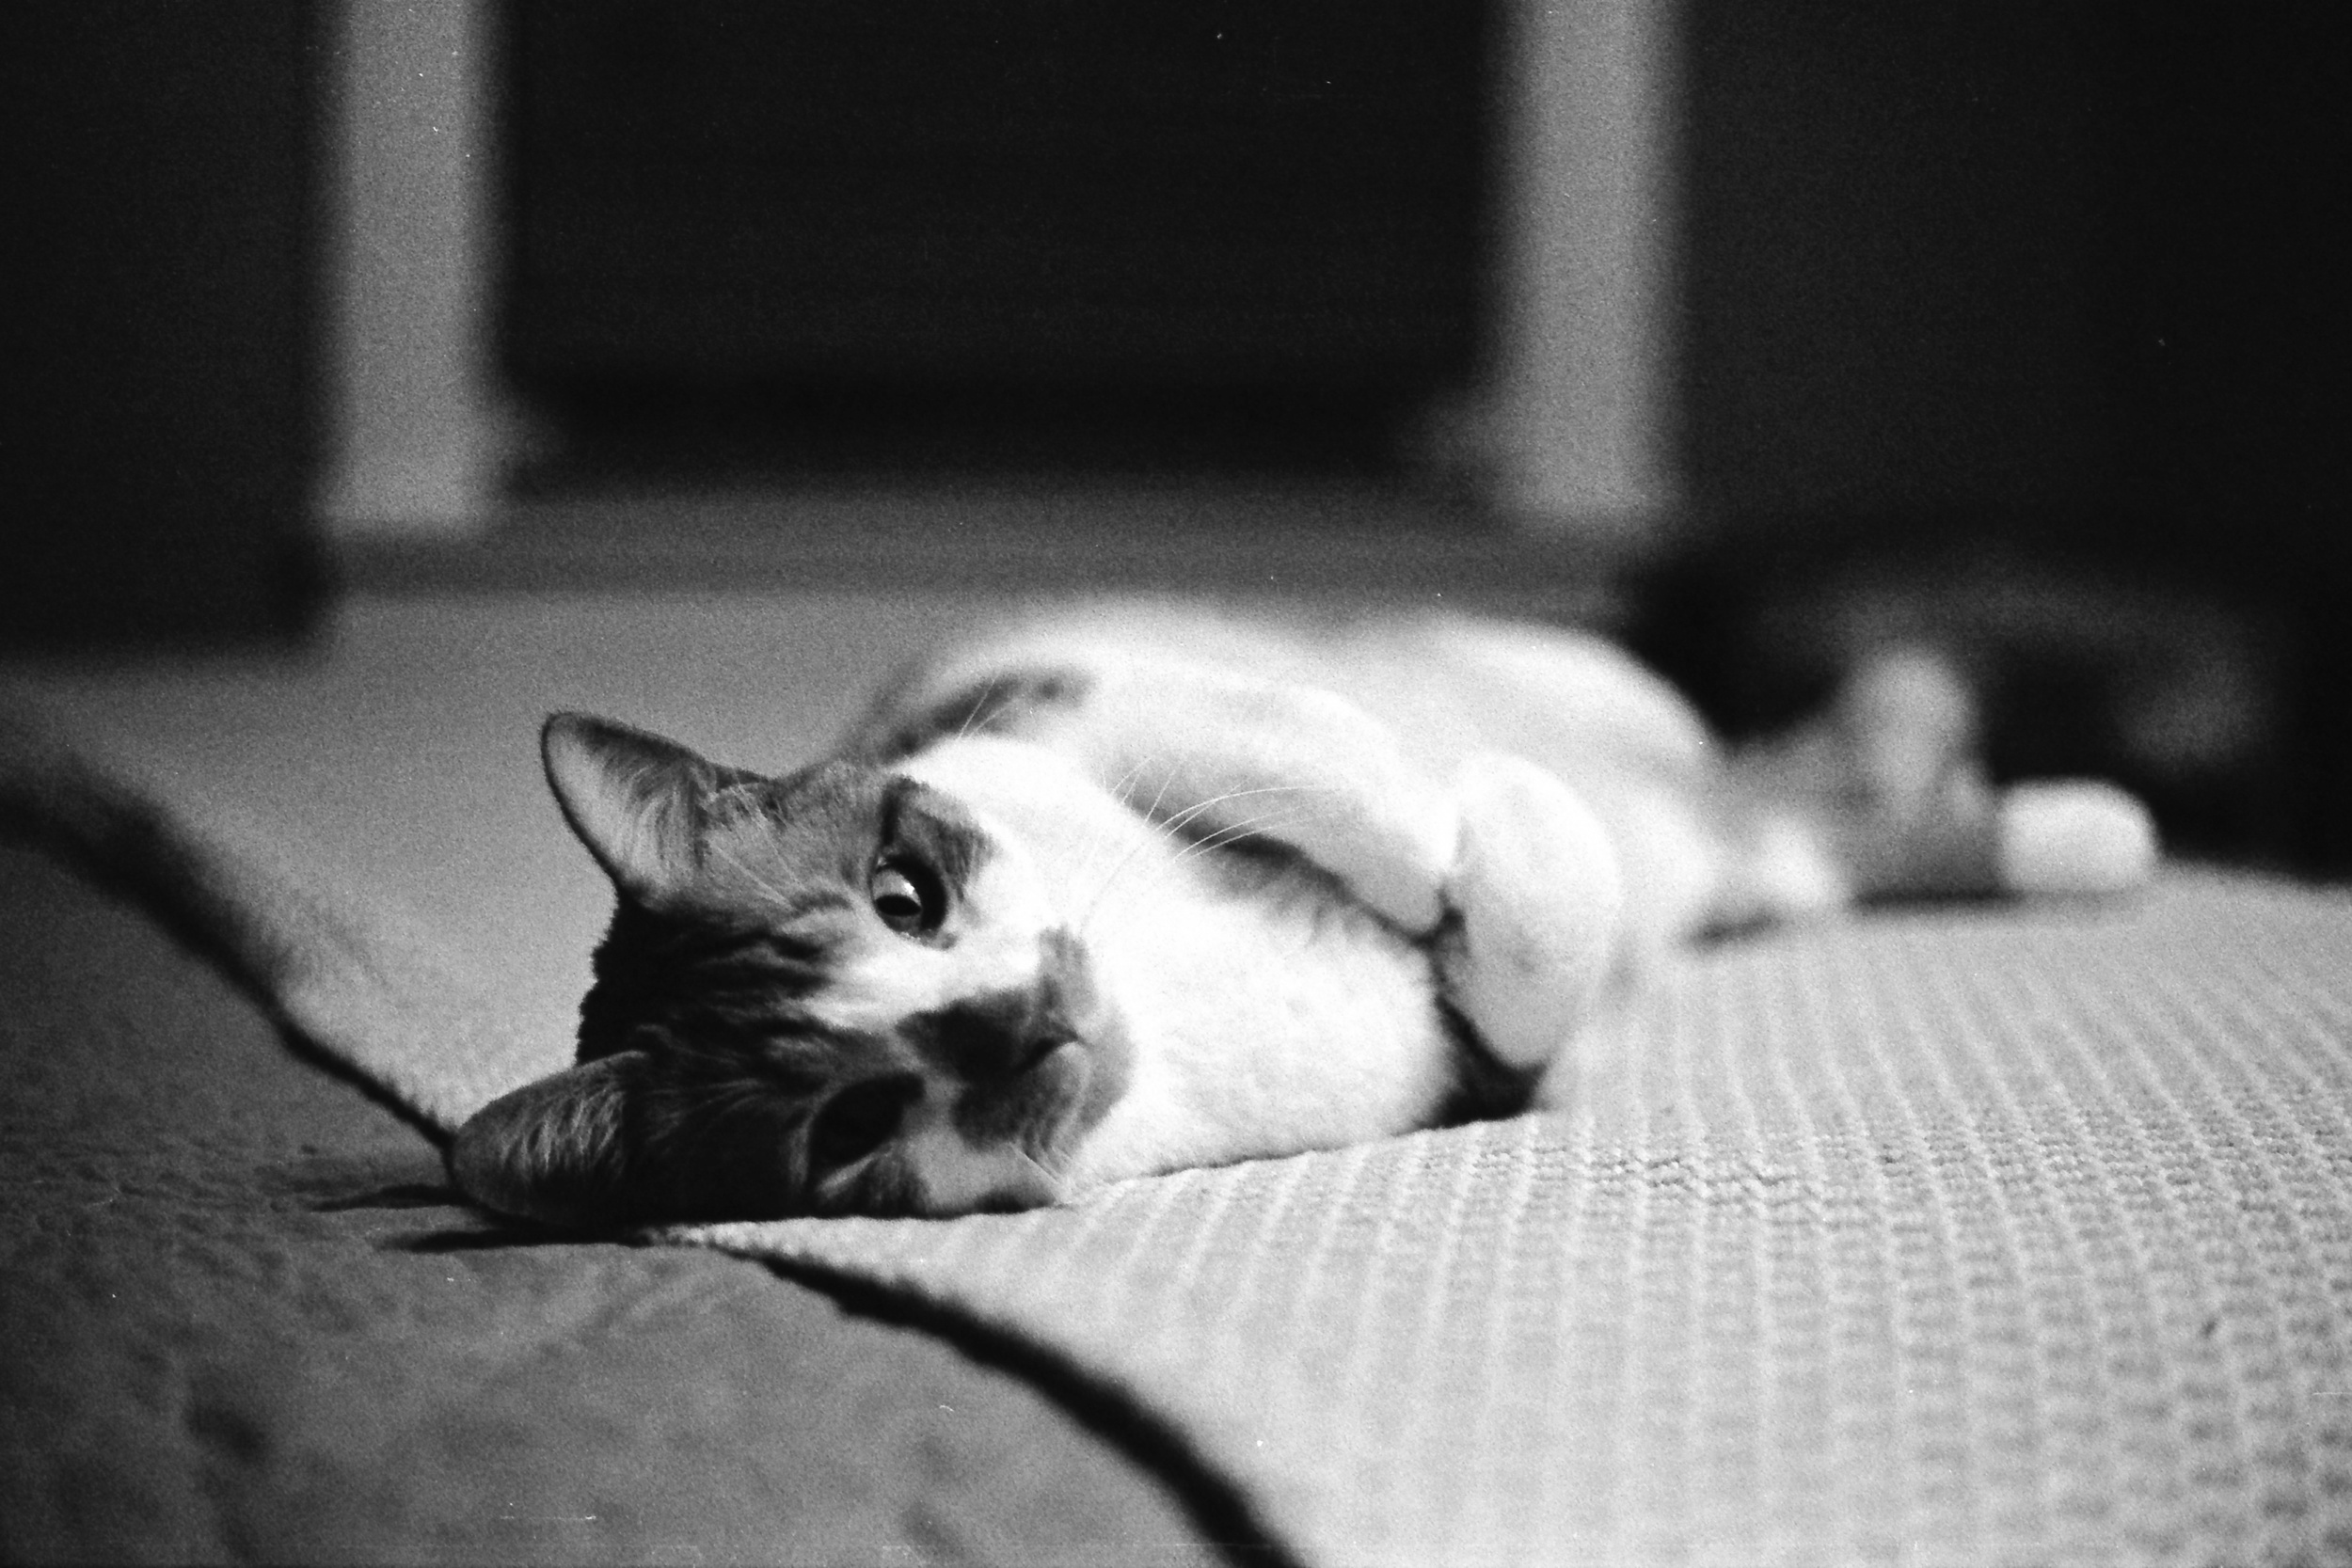 Timeless Black and White Film Photographs Taken in Grand Rapids, Michigan